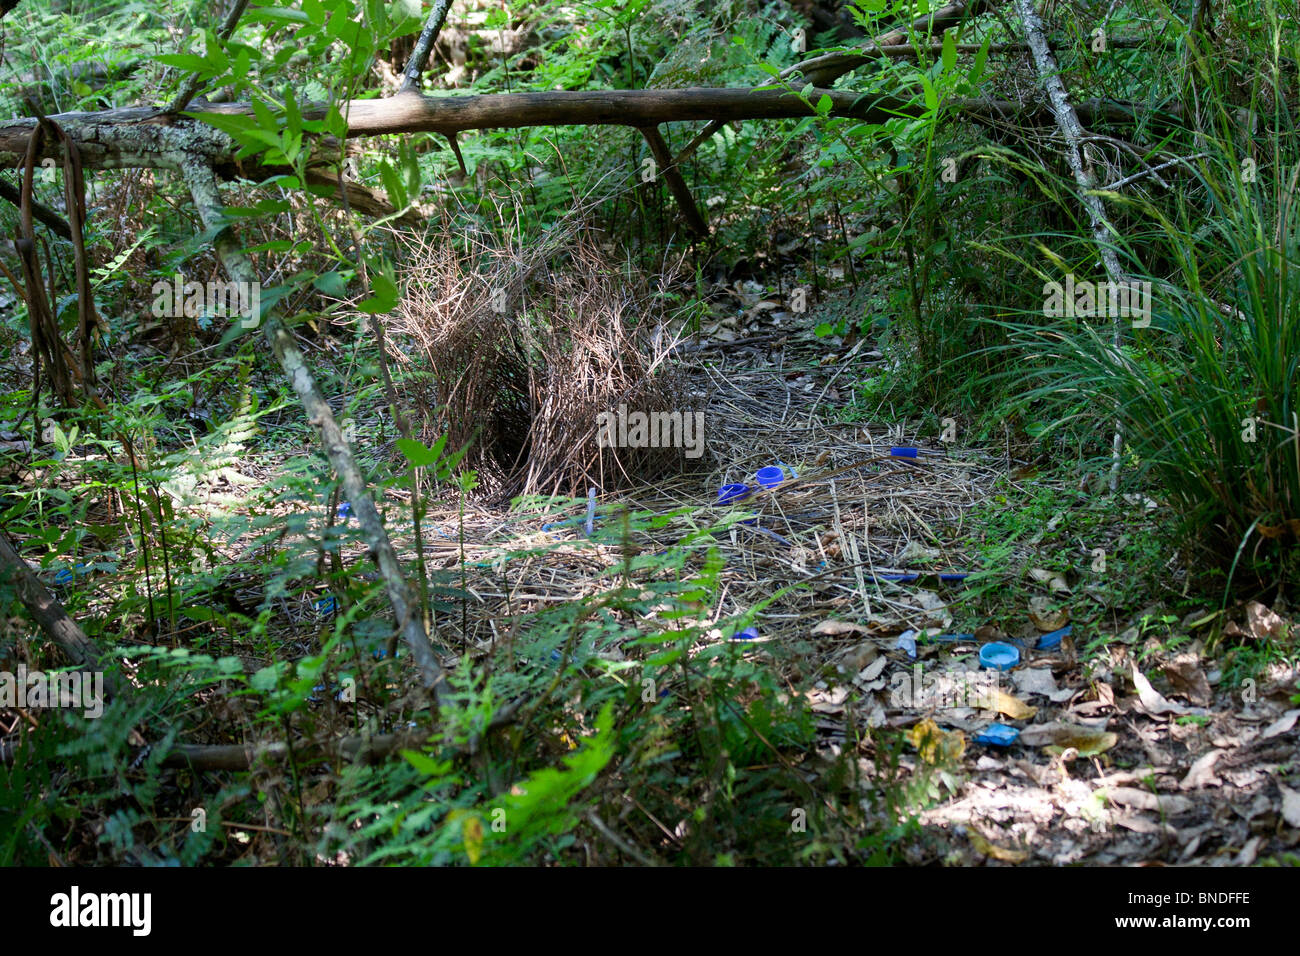 The bower of a Satin Bowerbird (Ptilonorhynchus violaceus) surrounded by blue items collected by the male bird, Australia Stock Photo